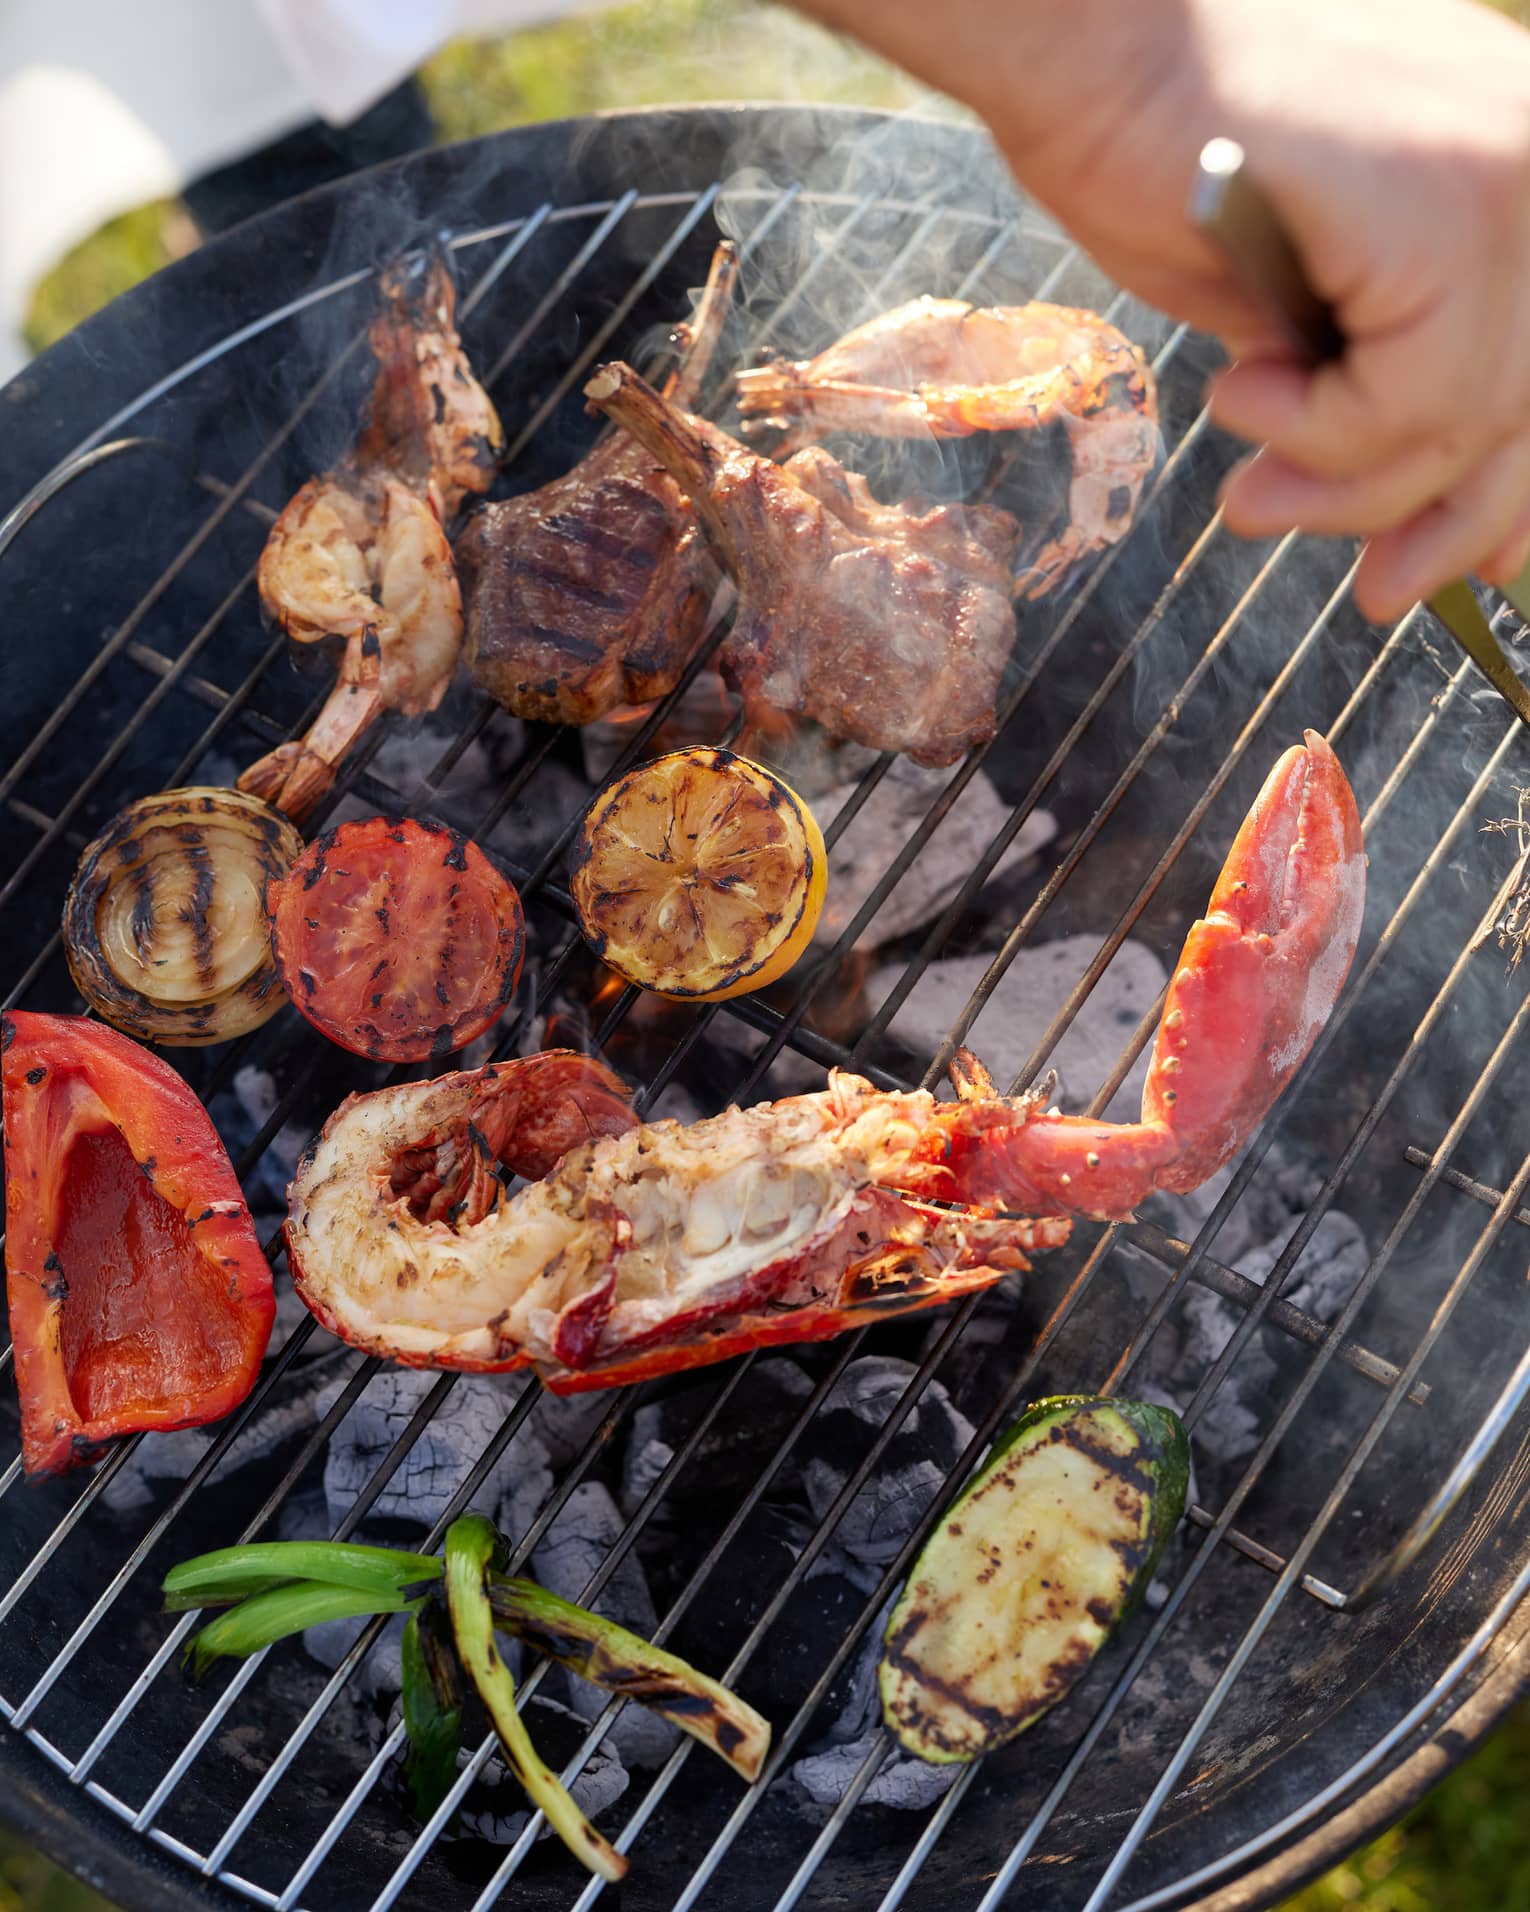 Seafood, lamb and vegetables cooking on a charcoal grill